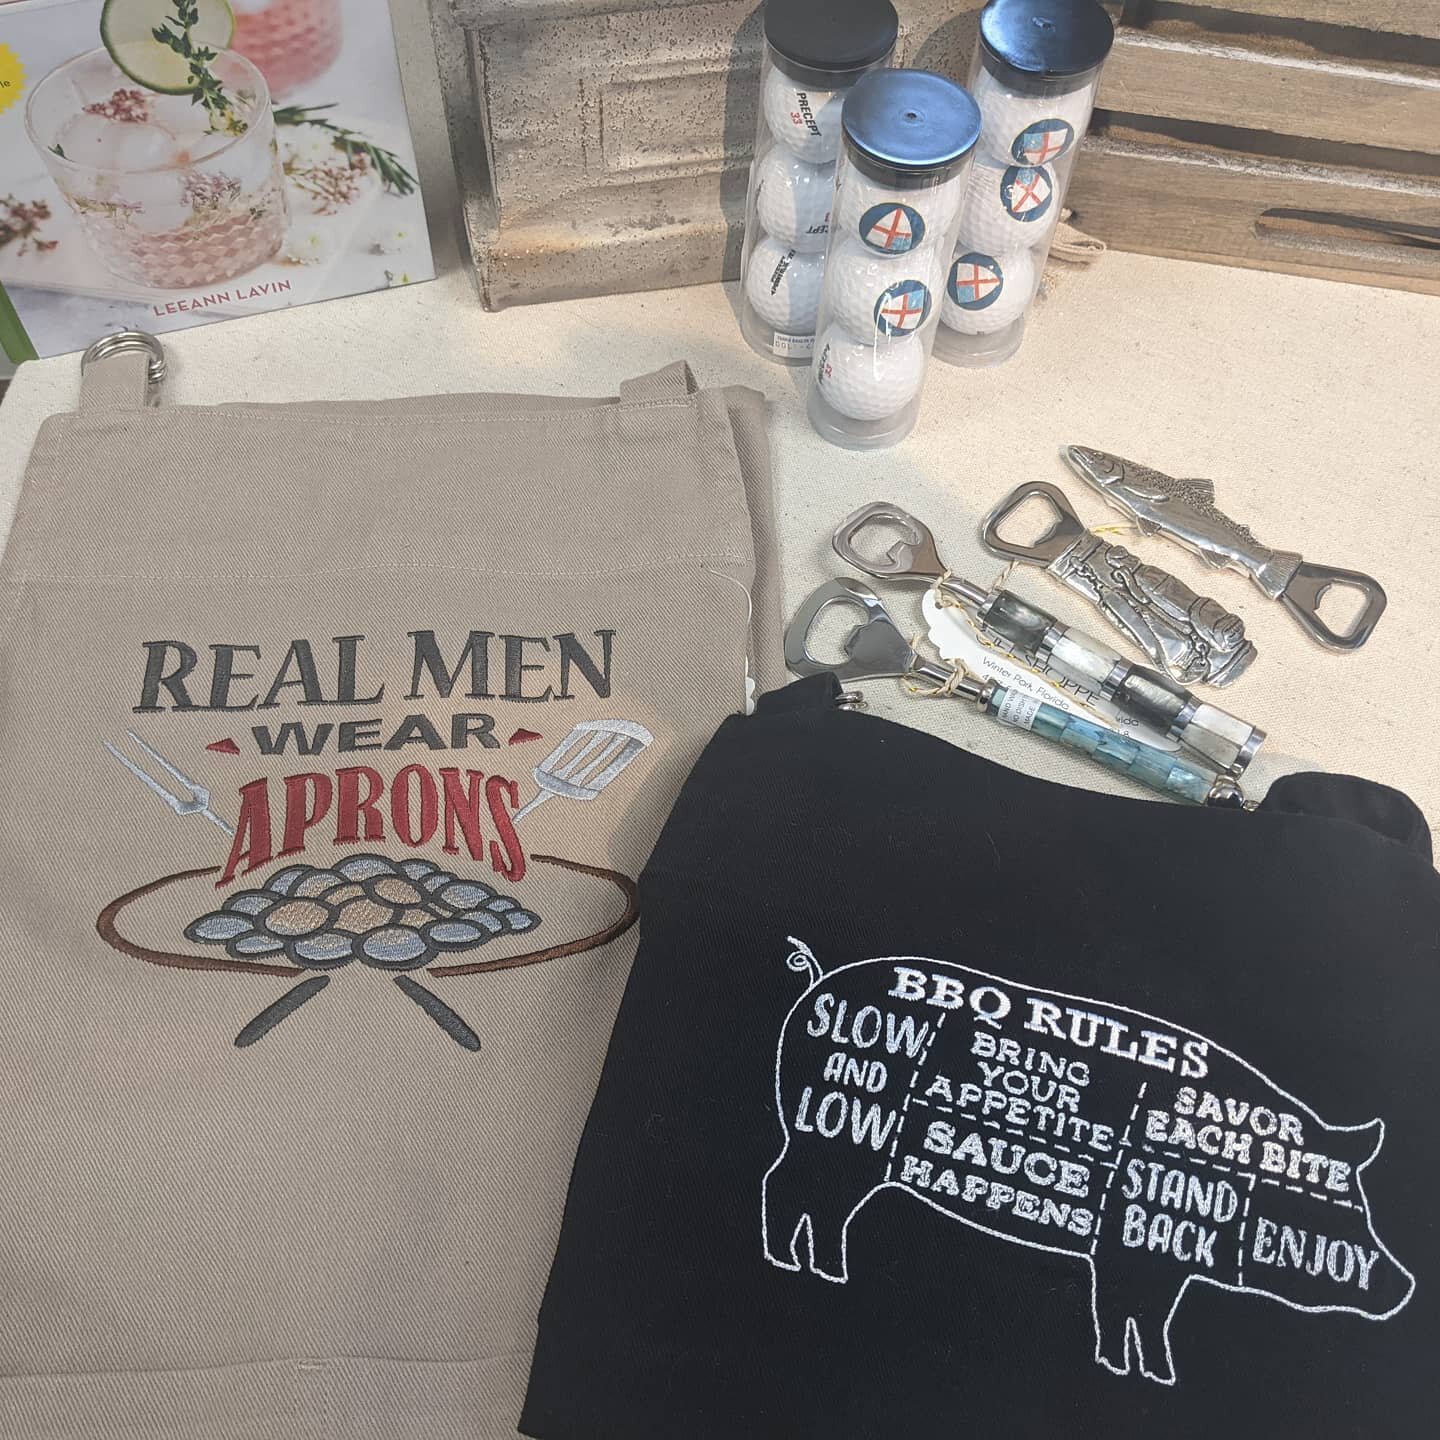 Father's Day is 5 days away!  We have unique gifts for dads and grandpas!
.
.
.
.
#shoplocal #fathersdaygifts #allsaintswinterpark #parkavenuewp